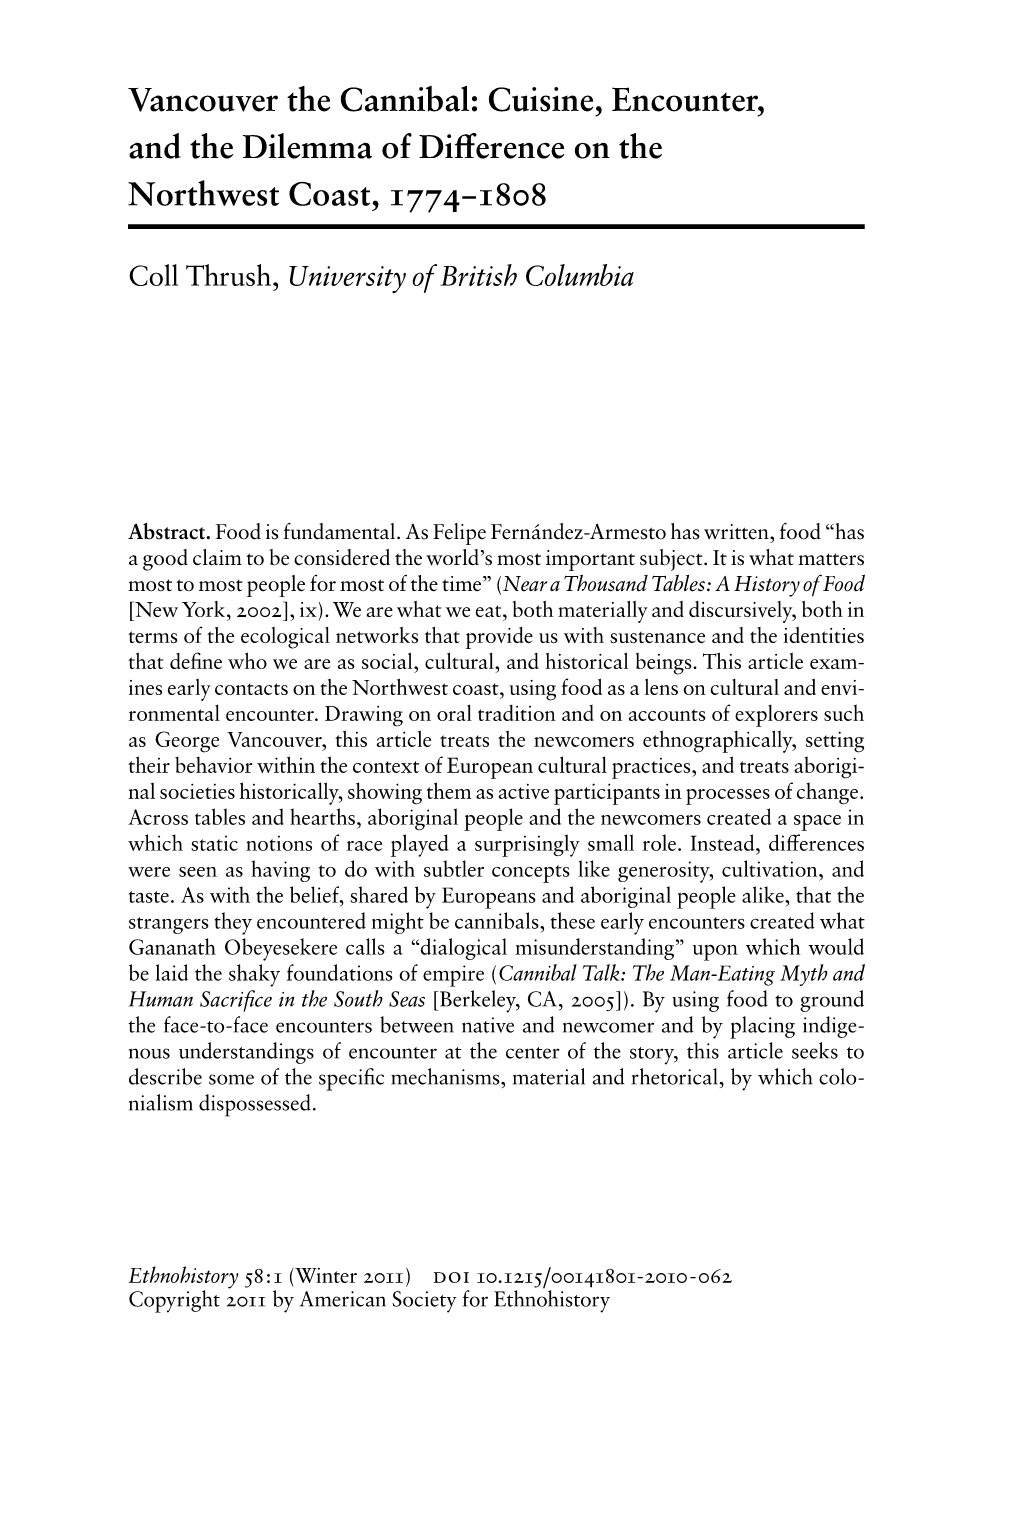 Vancouver the Cannibal: Cuisine, Encounter, and the Dilemma of Difference on the Northwest Coast, 1774–1808